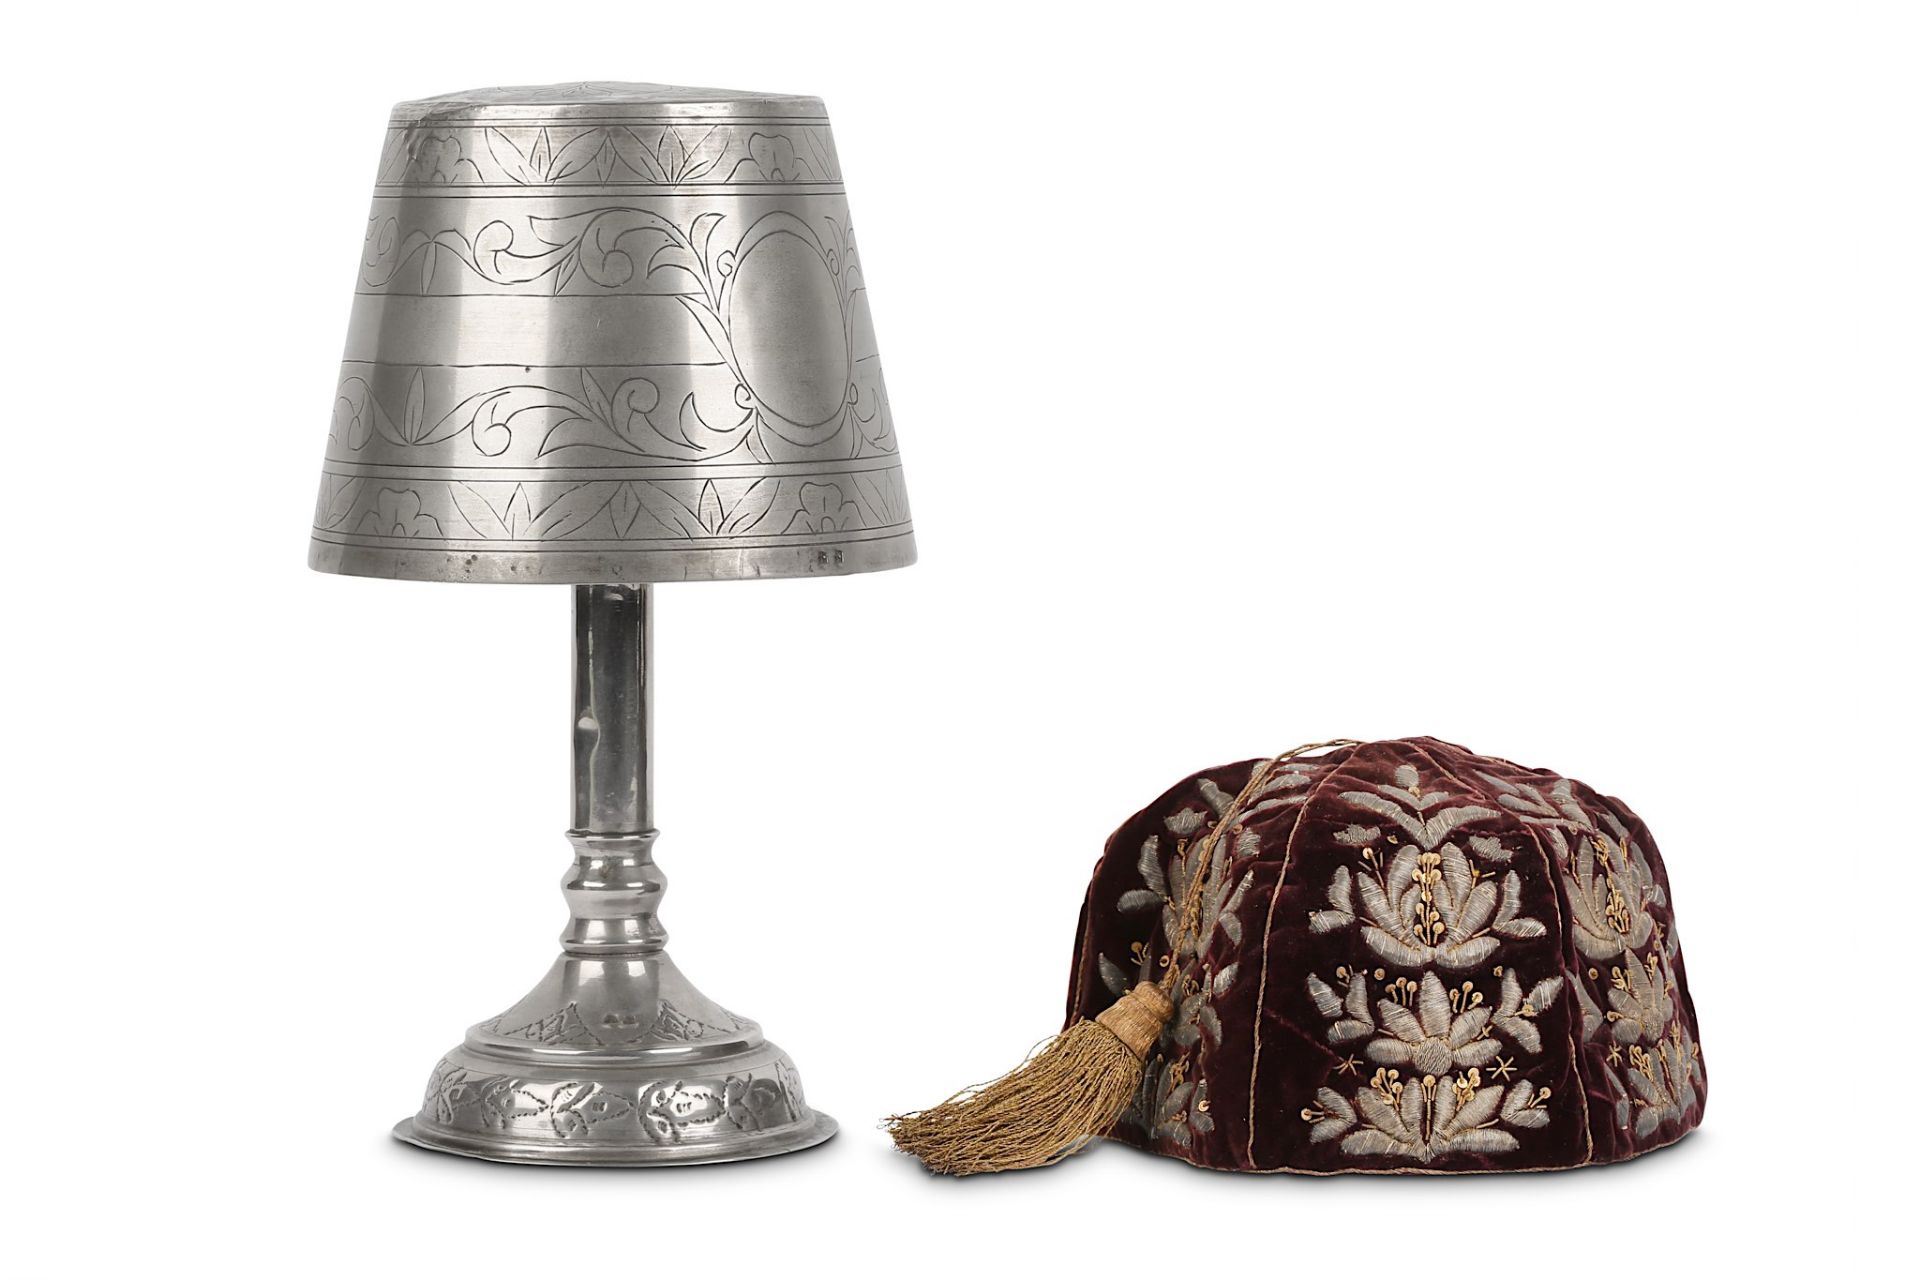 AN OTTOMAN SILVER FEZ STAND AND SIX-SIDED CAP Otto